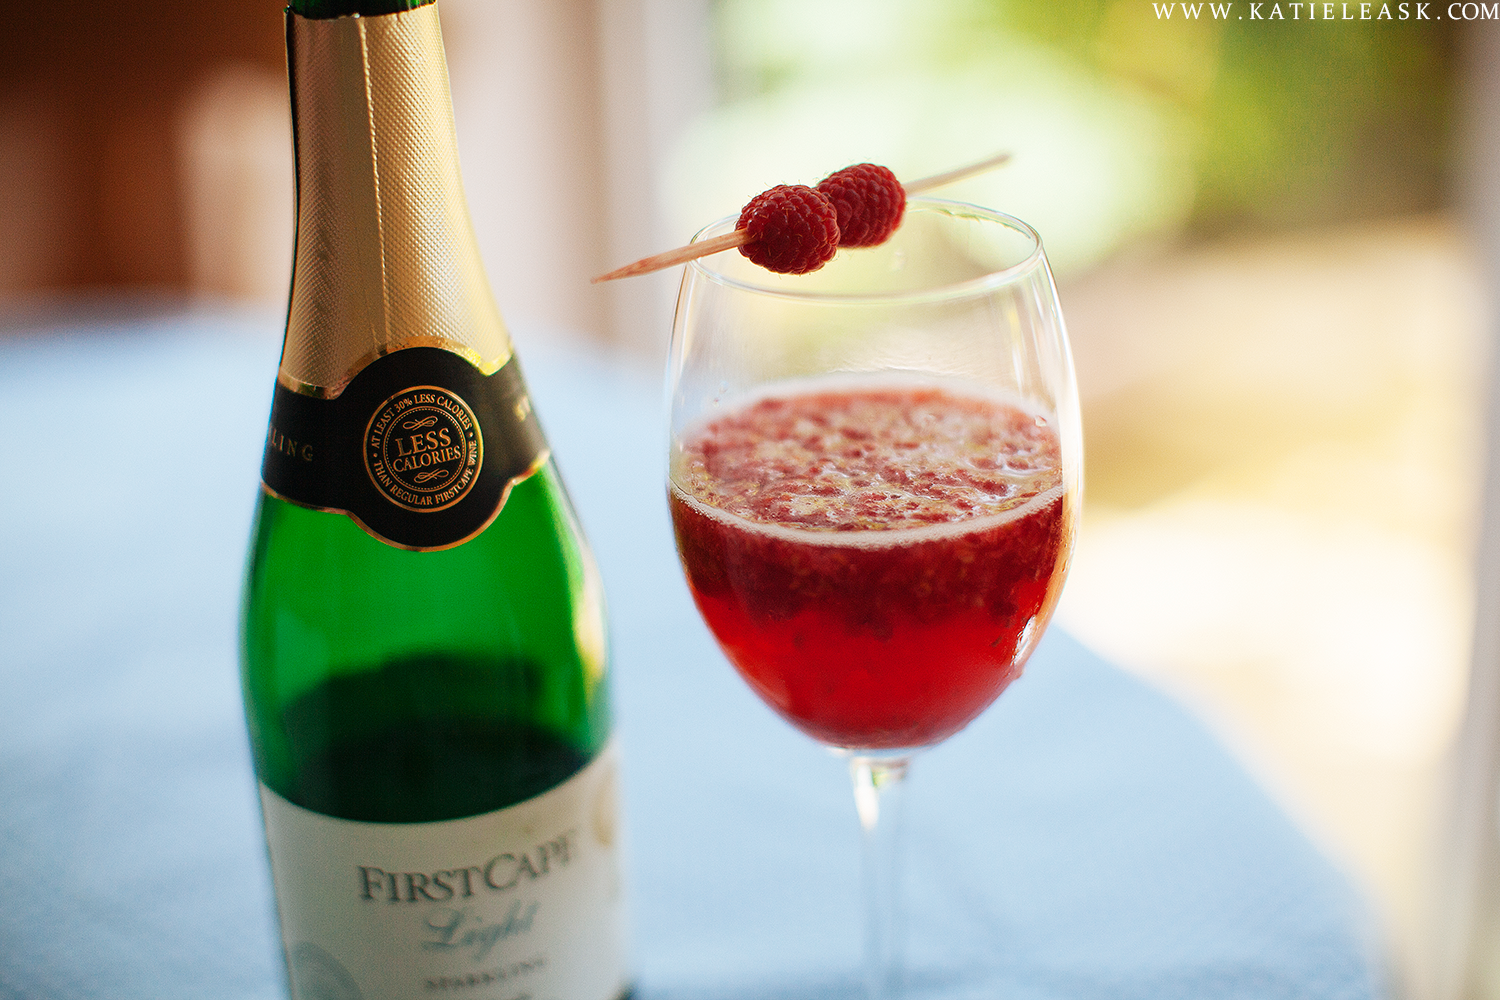 Katie-Leask-Photography-Rasperry-Champagne-Cocktail-003-s-